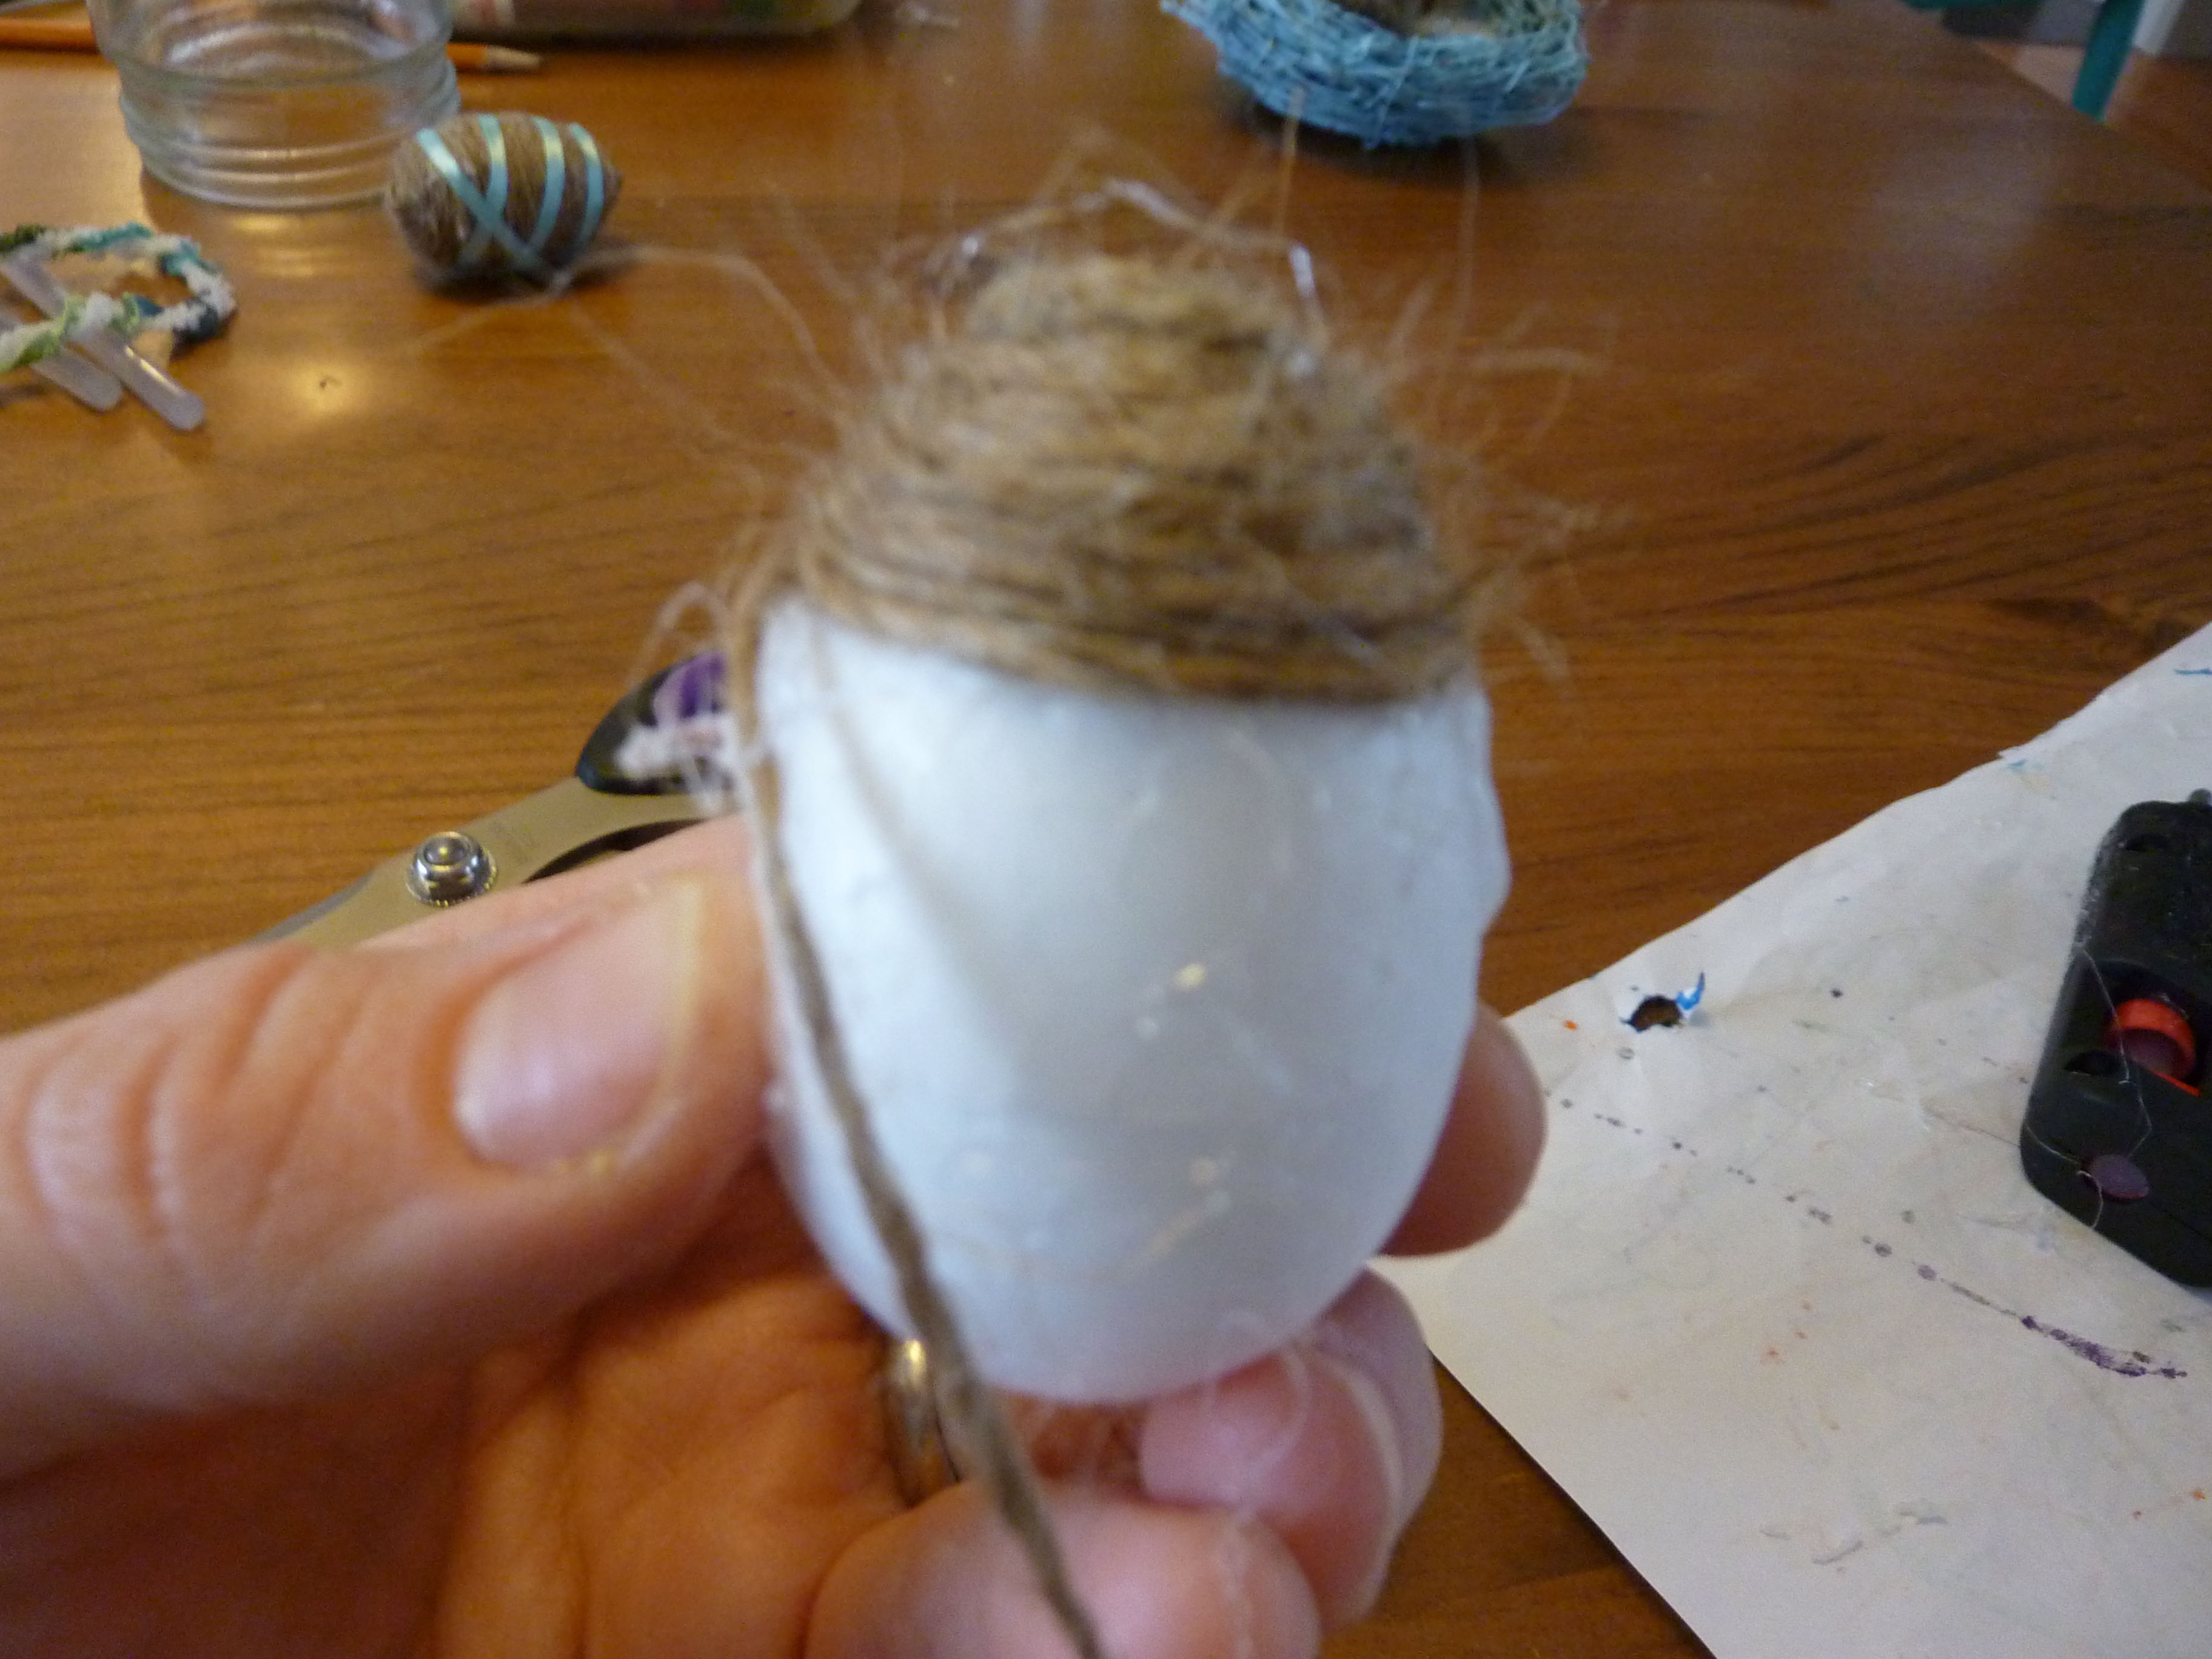 The egg being wrapped by twine.